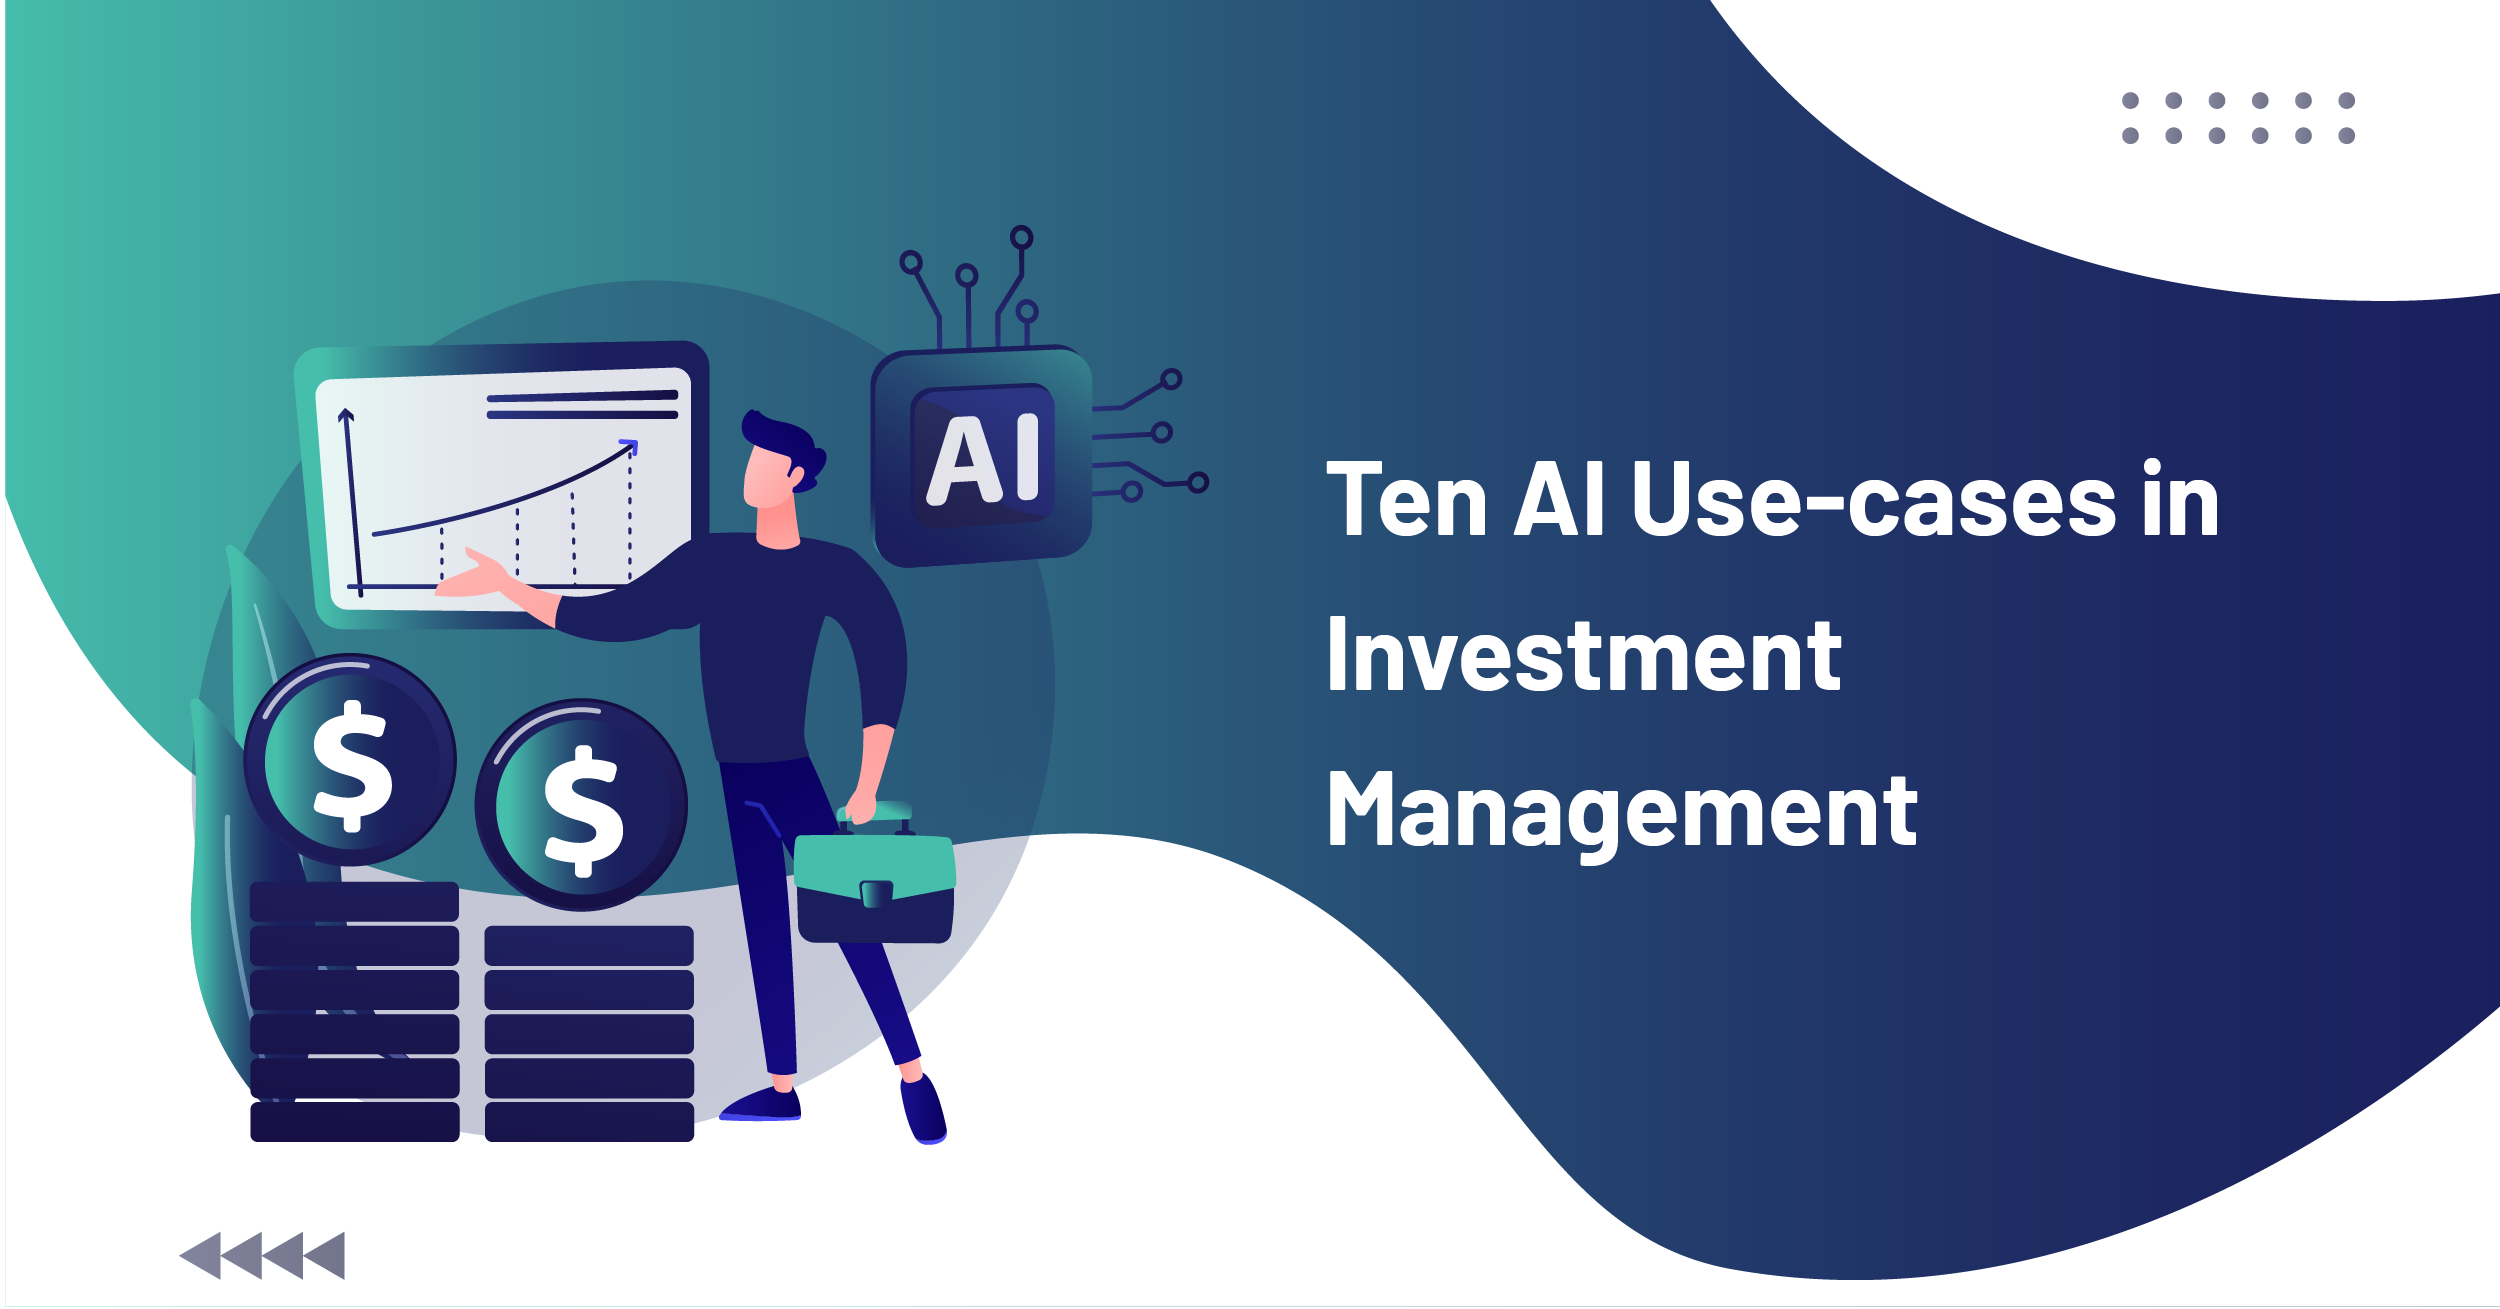 AI use-cases in investment management